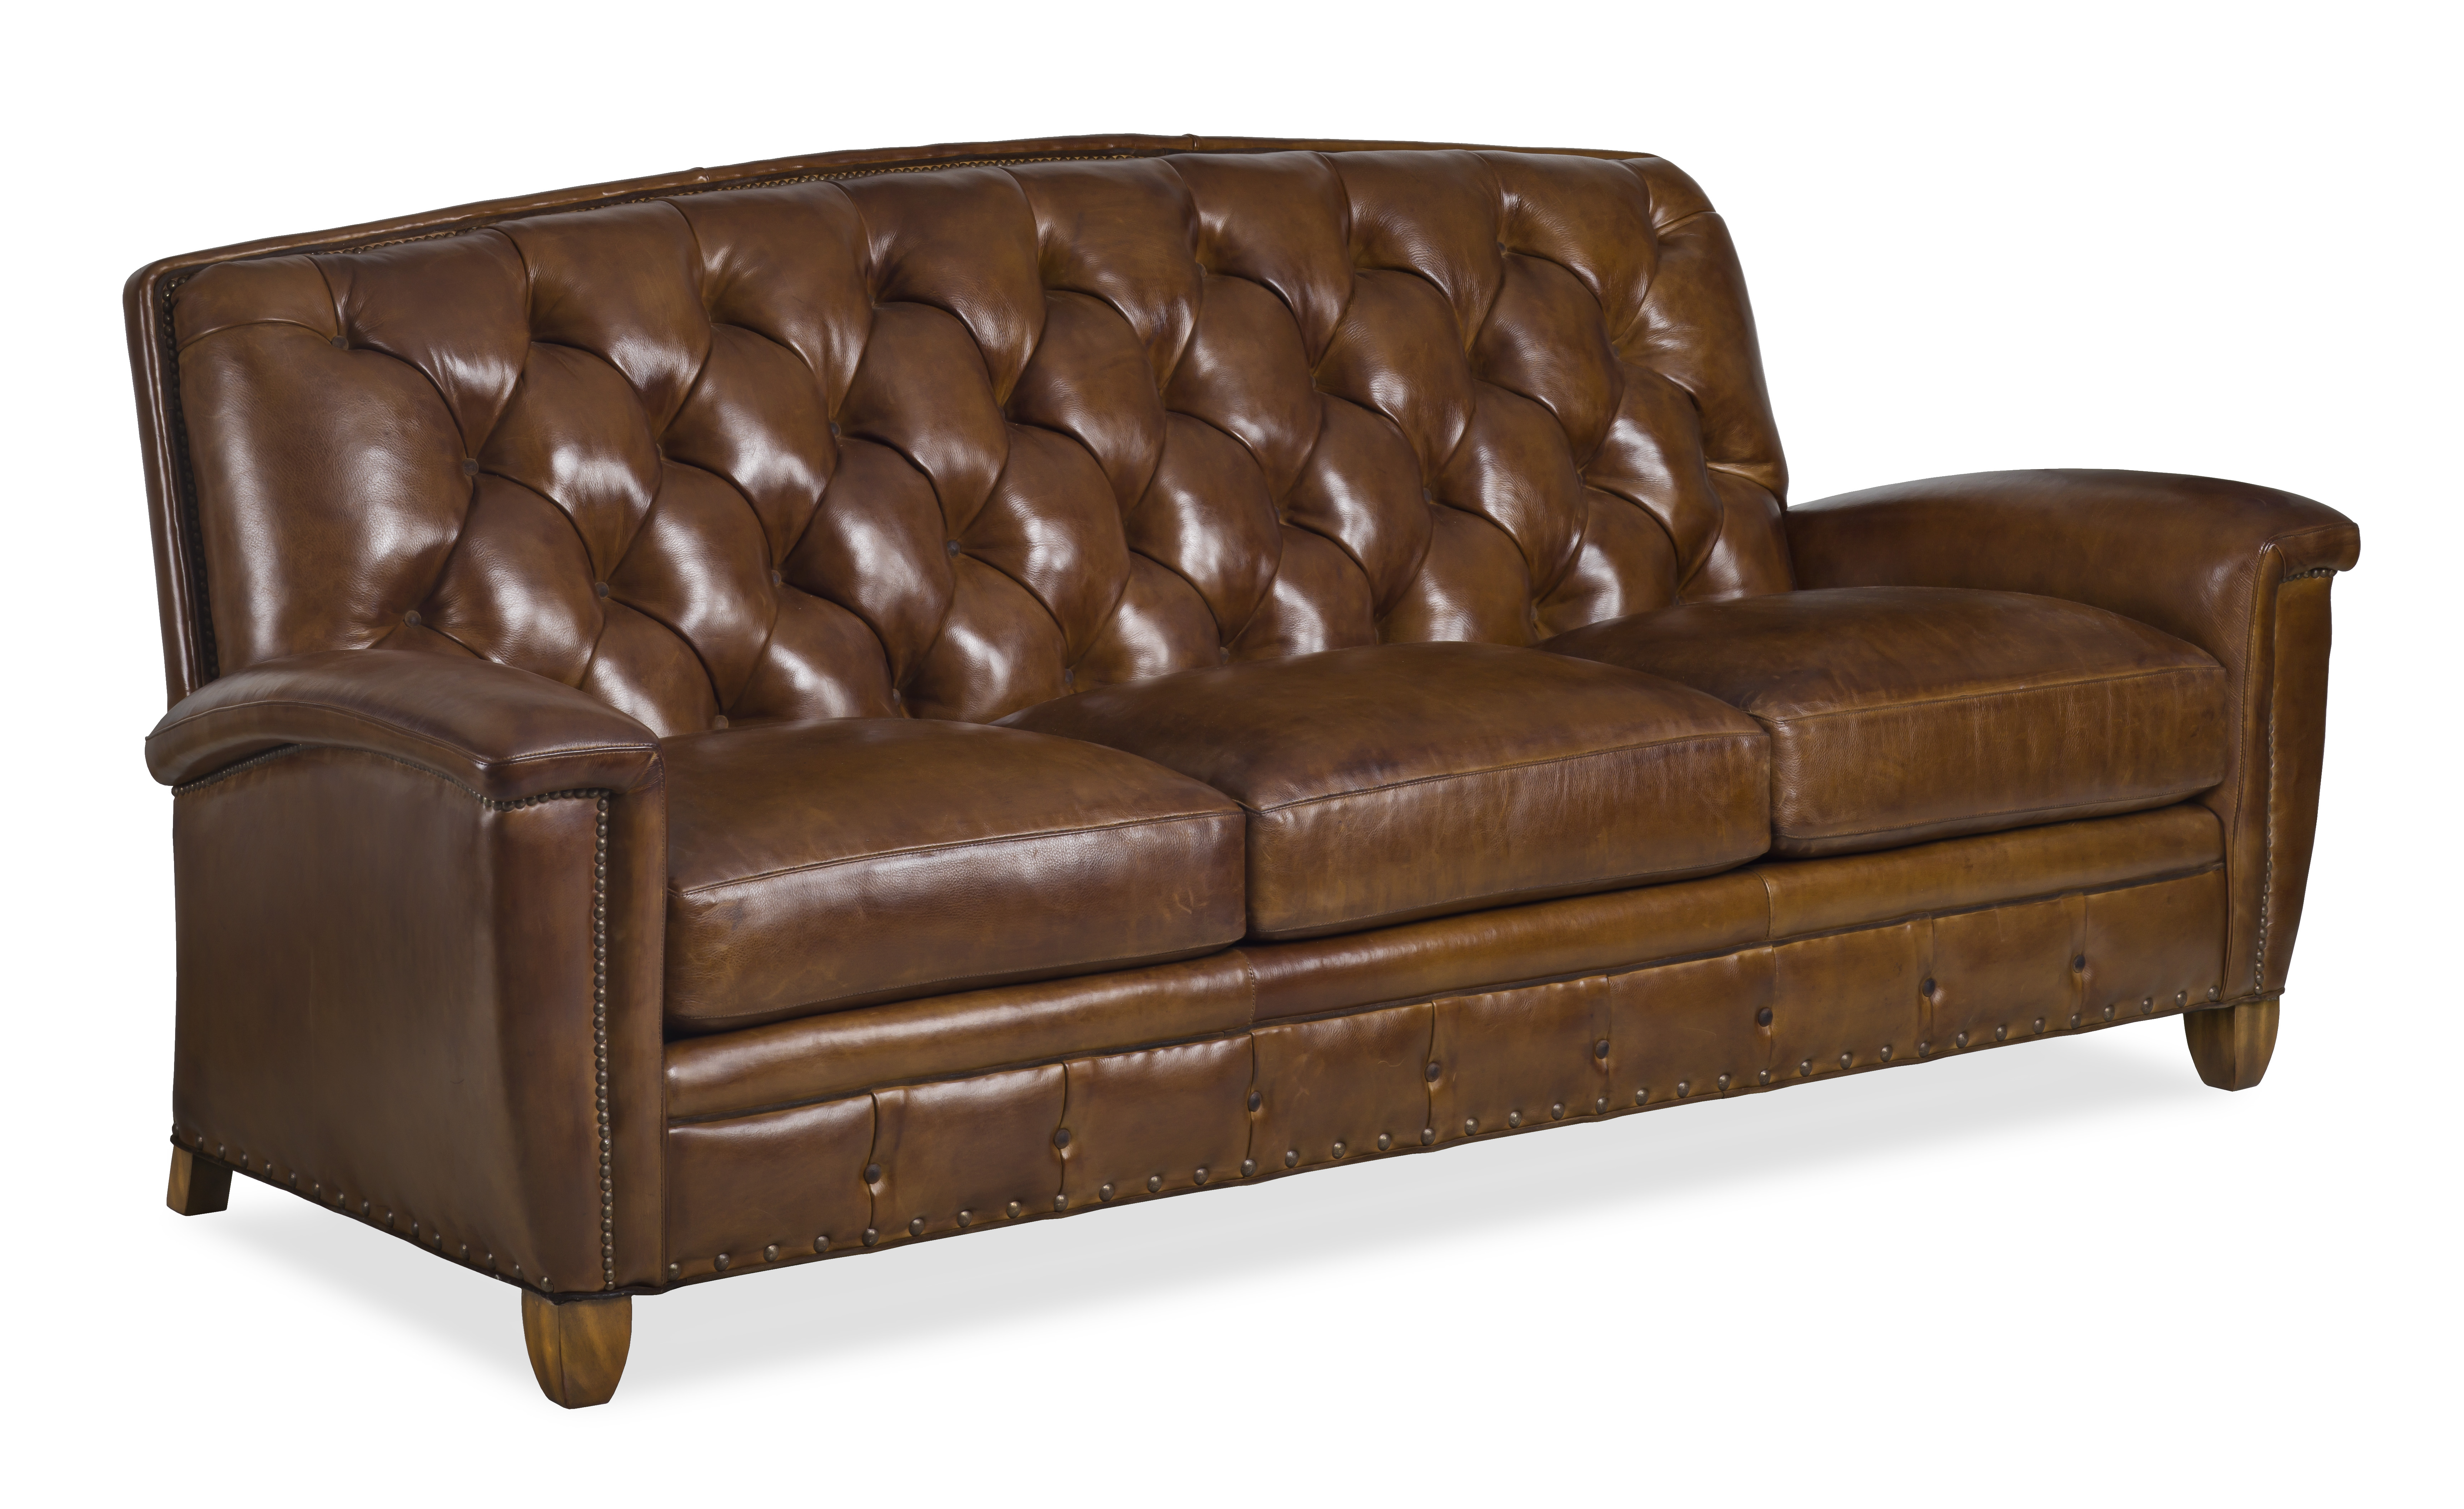 FRENCH CURVE SOFA WITH LACING